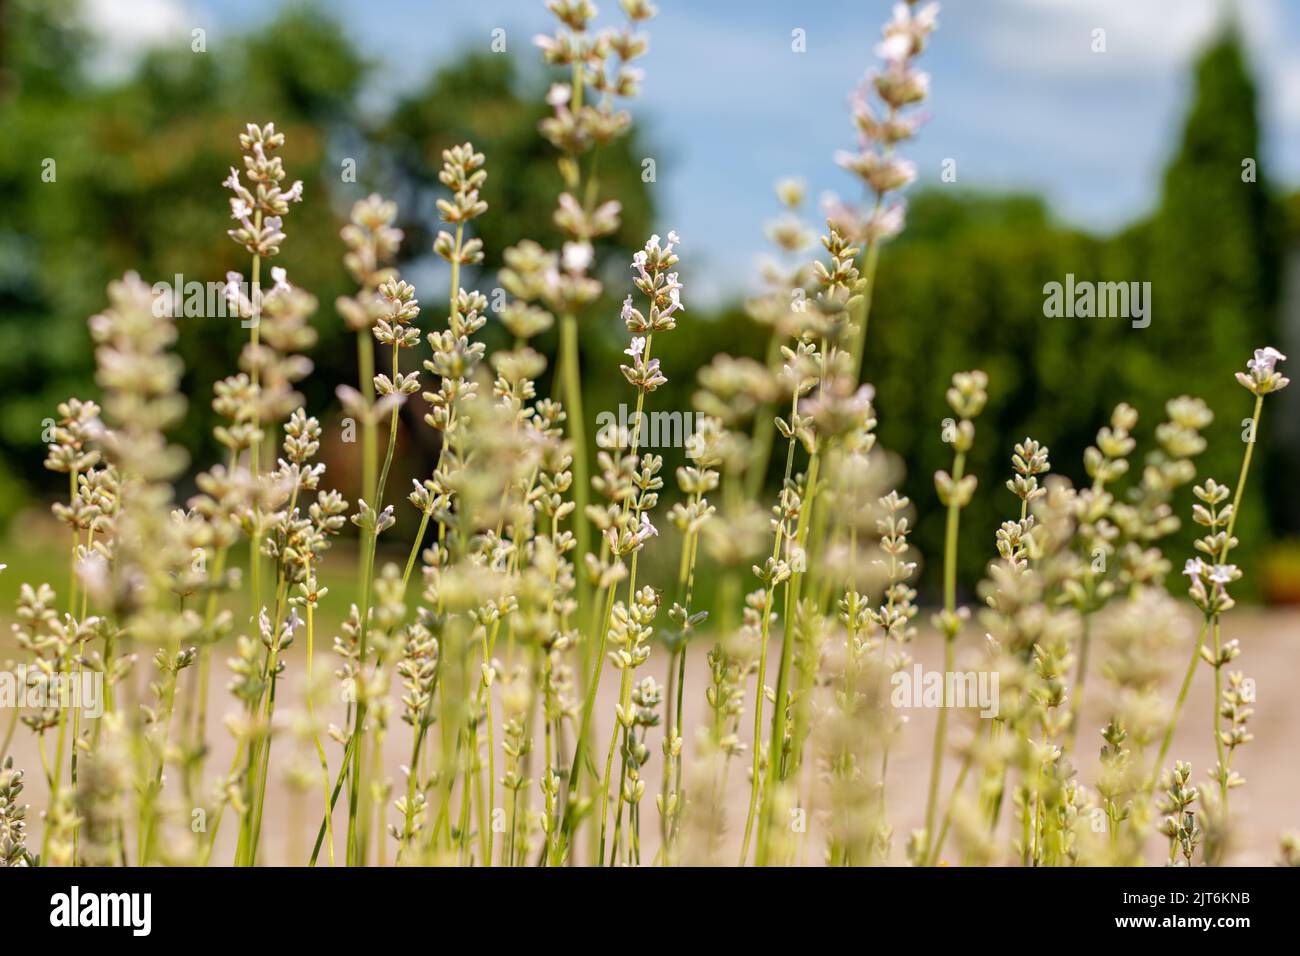 Lavender in full bloom with its beautiful white color flowers. White lavender plant background. Stock Photo